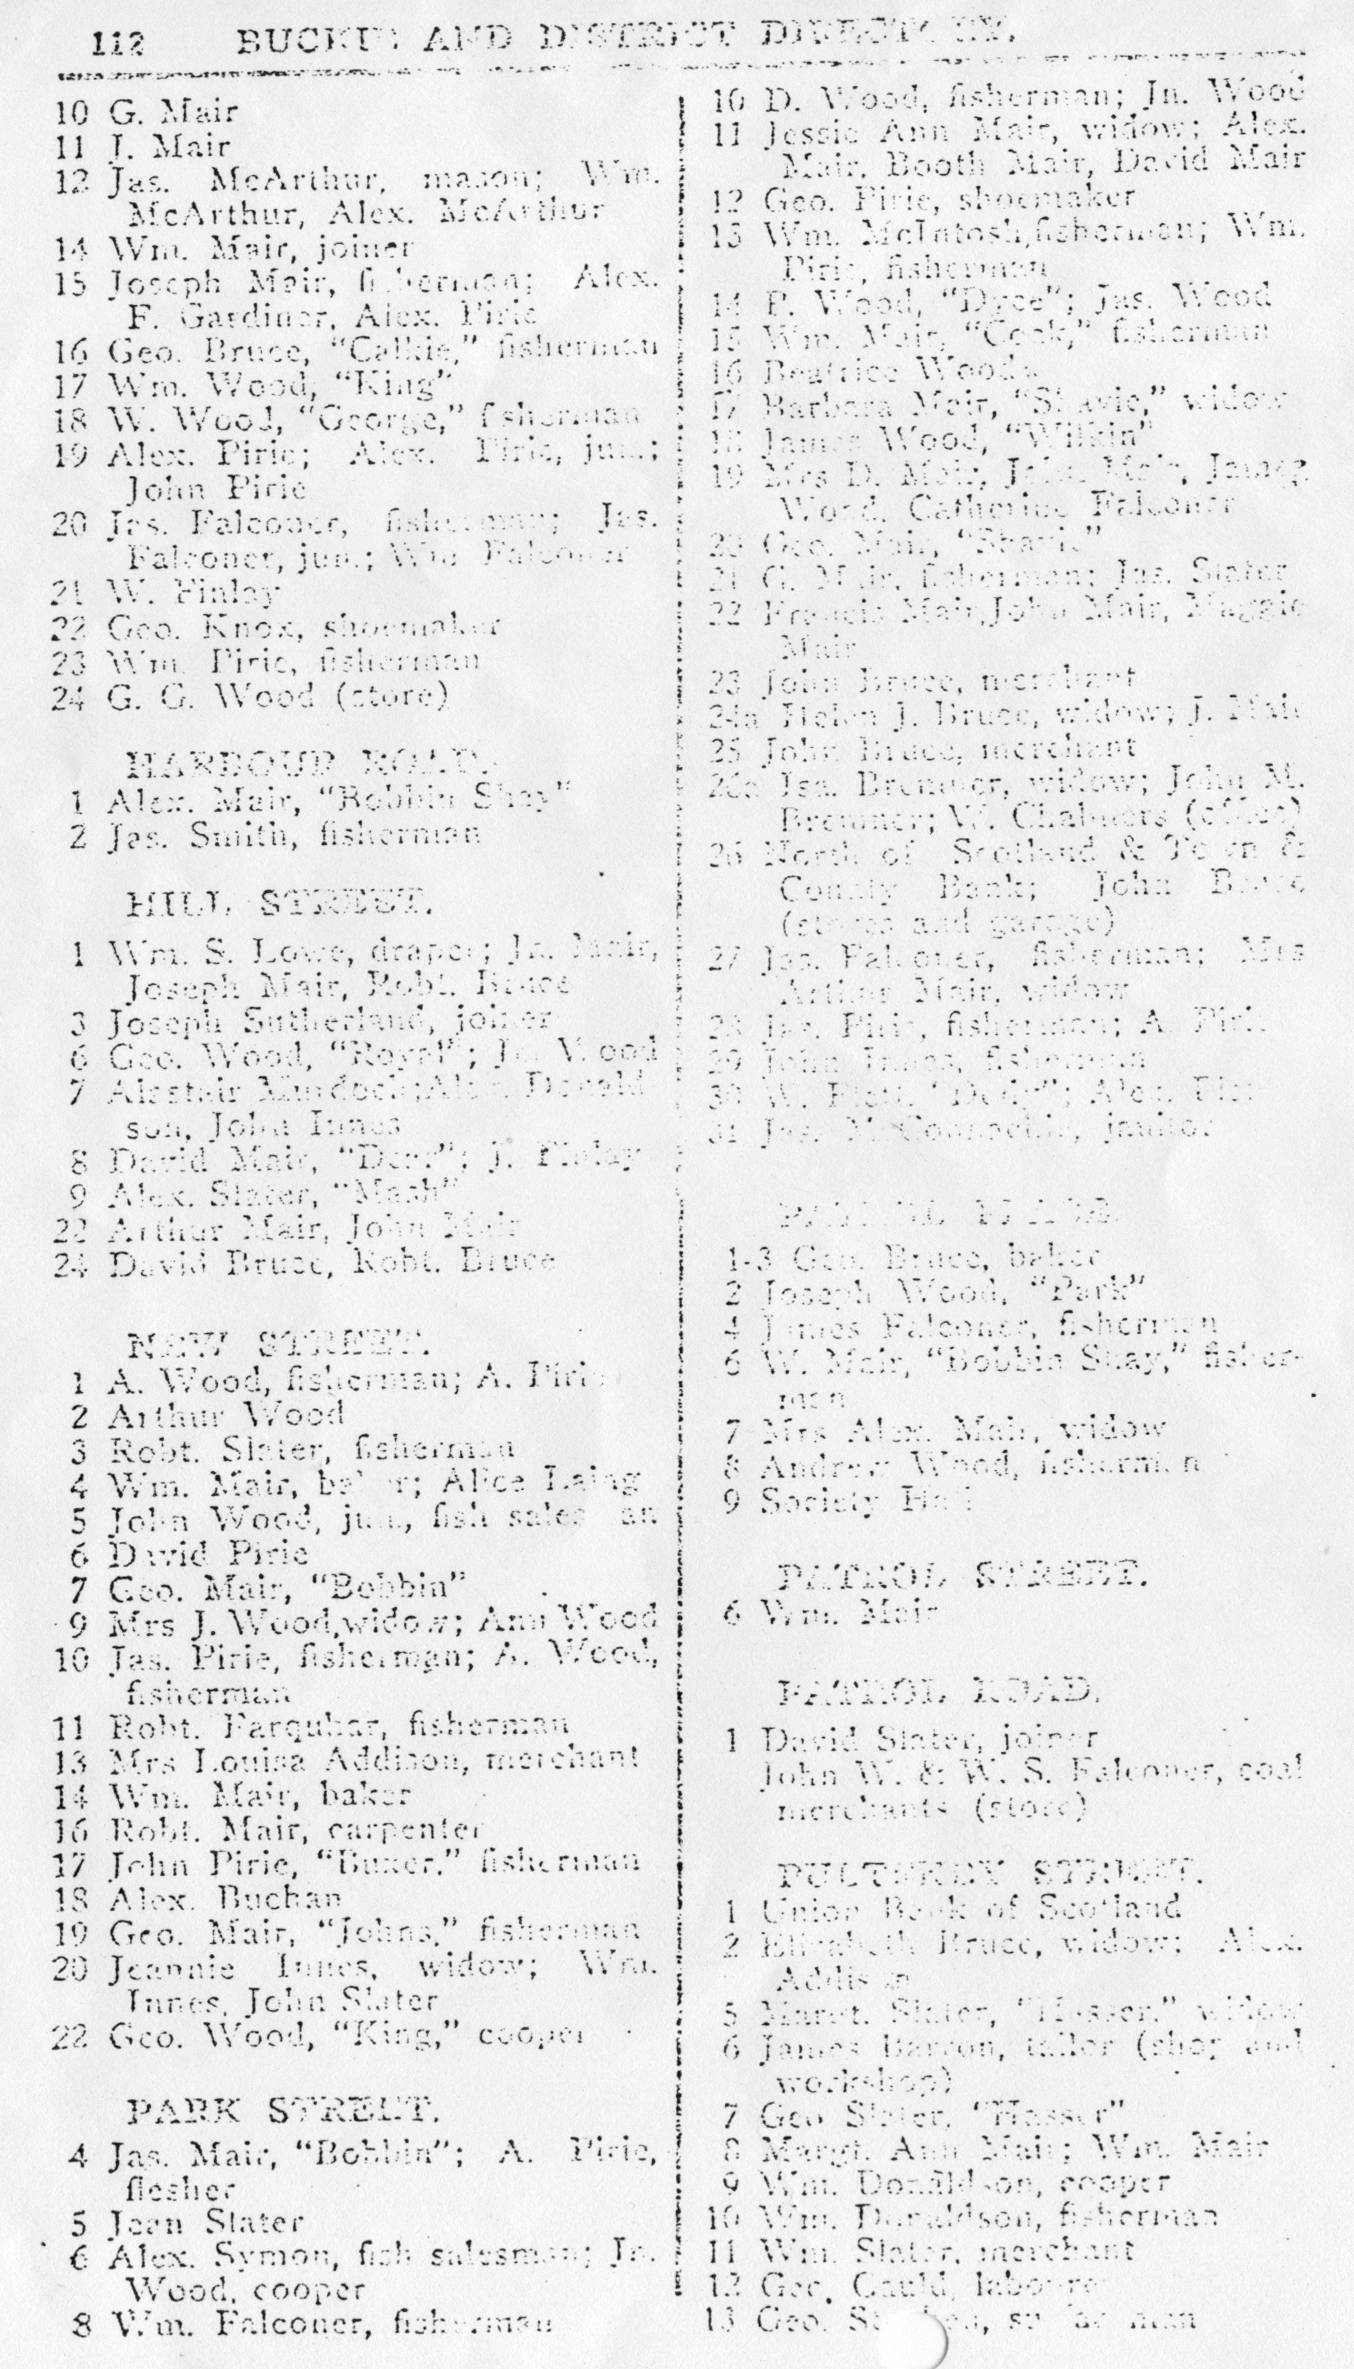 Buckie and District Directory 1926, page 112, Portknockie by street / house